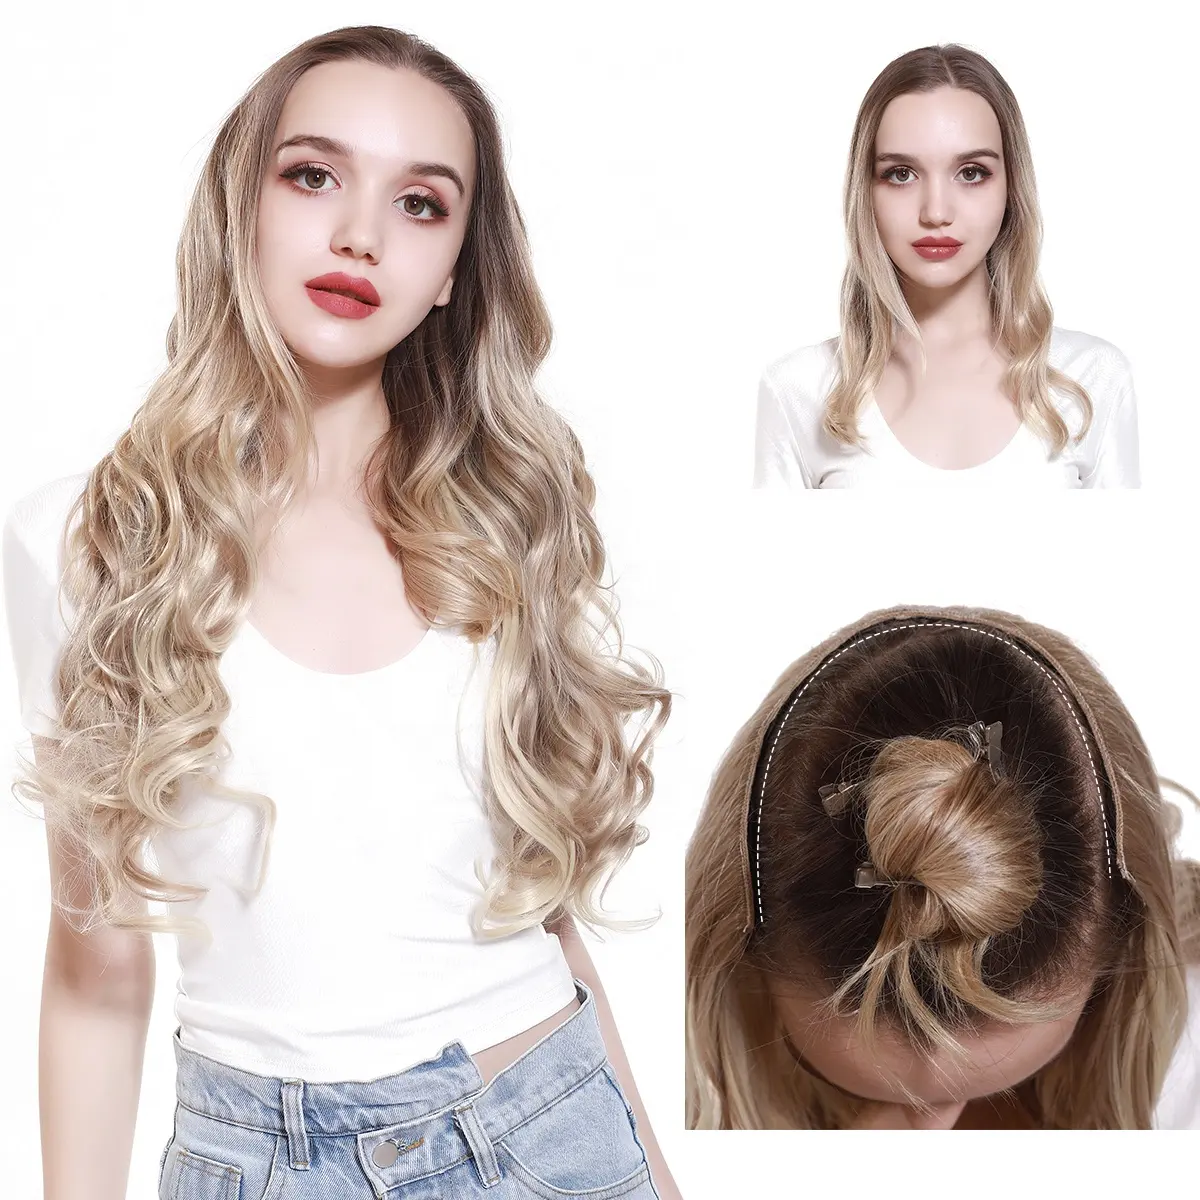 Wholesale 26" 1 Piece Synthetic Curly Seamless Natural Ombre Blonde 5 Clips In Synthetic Hair Extensions Wigs For White Women